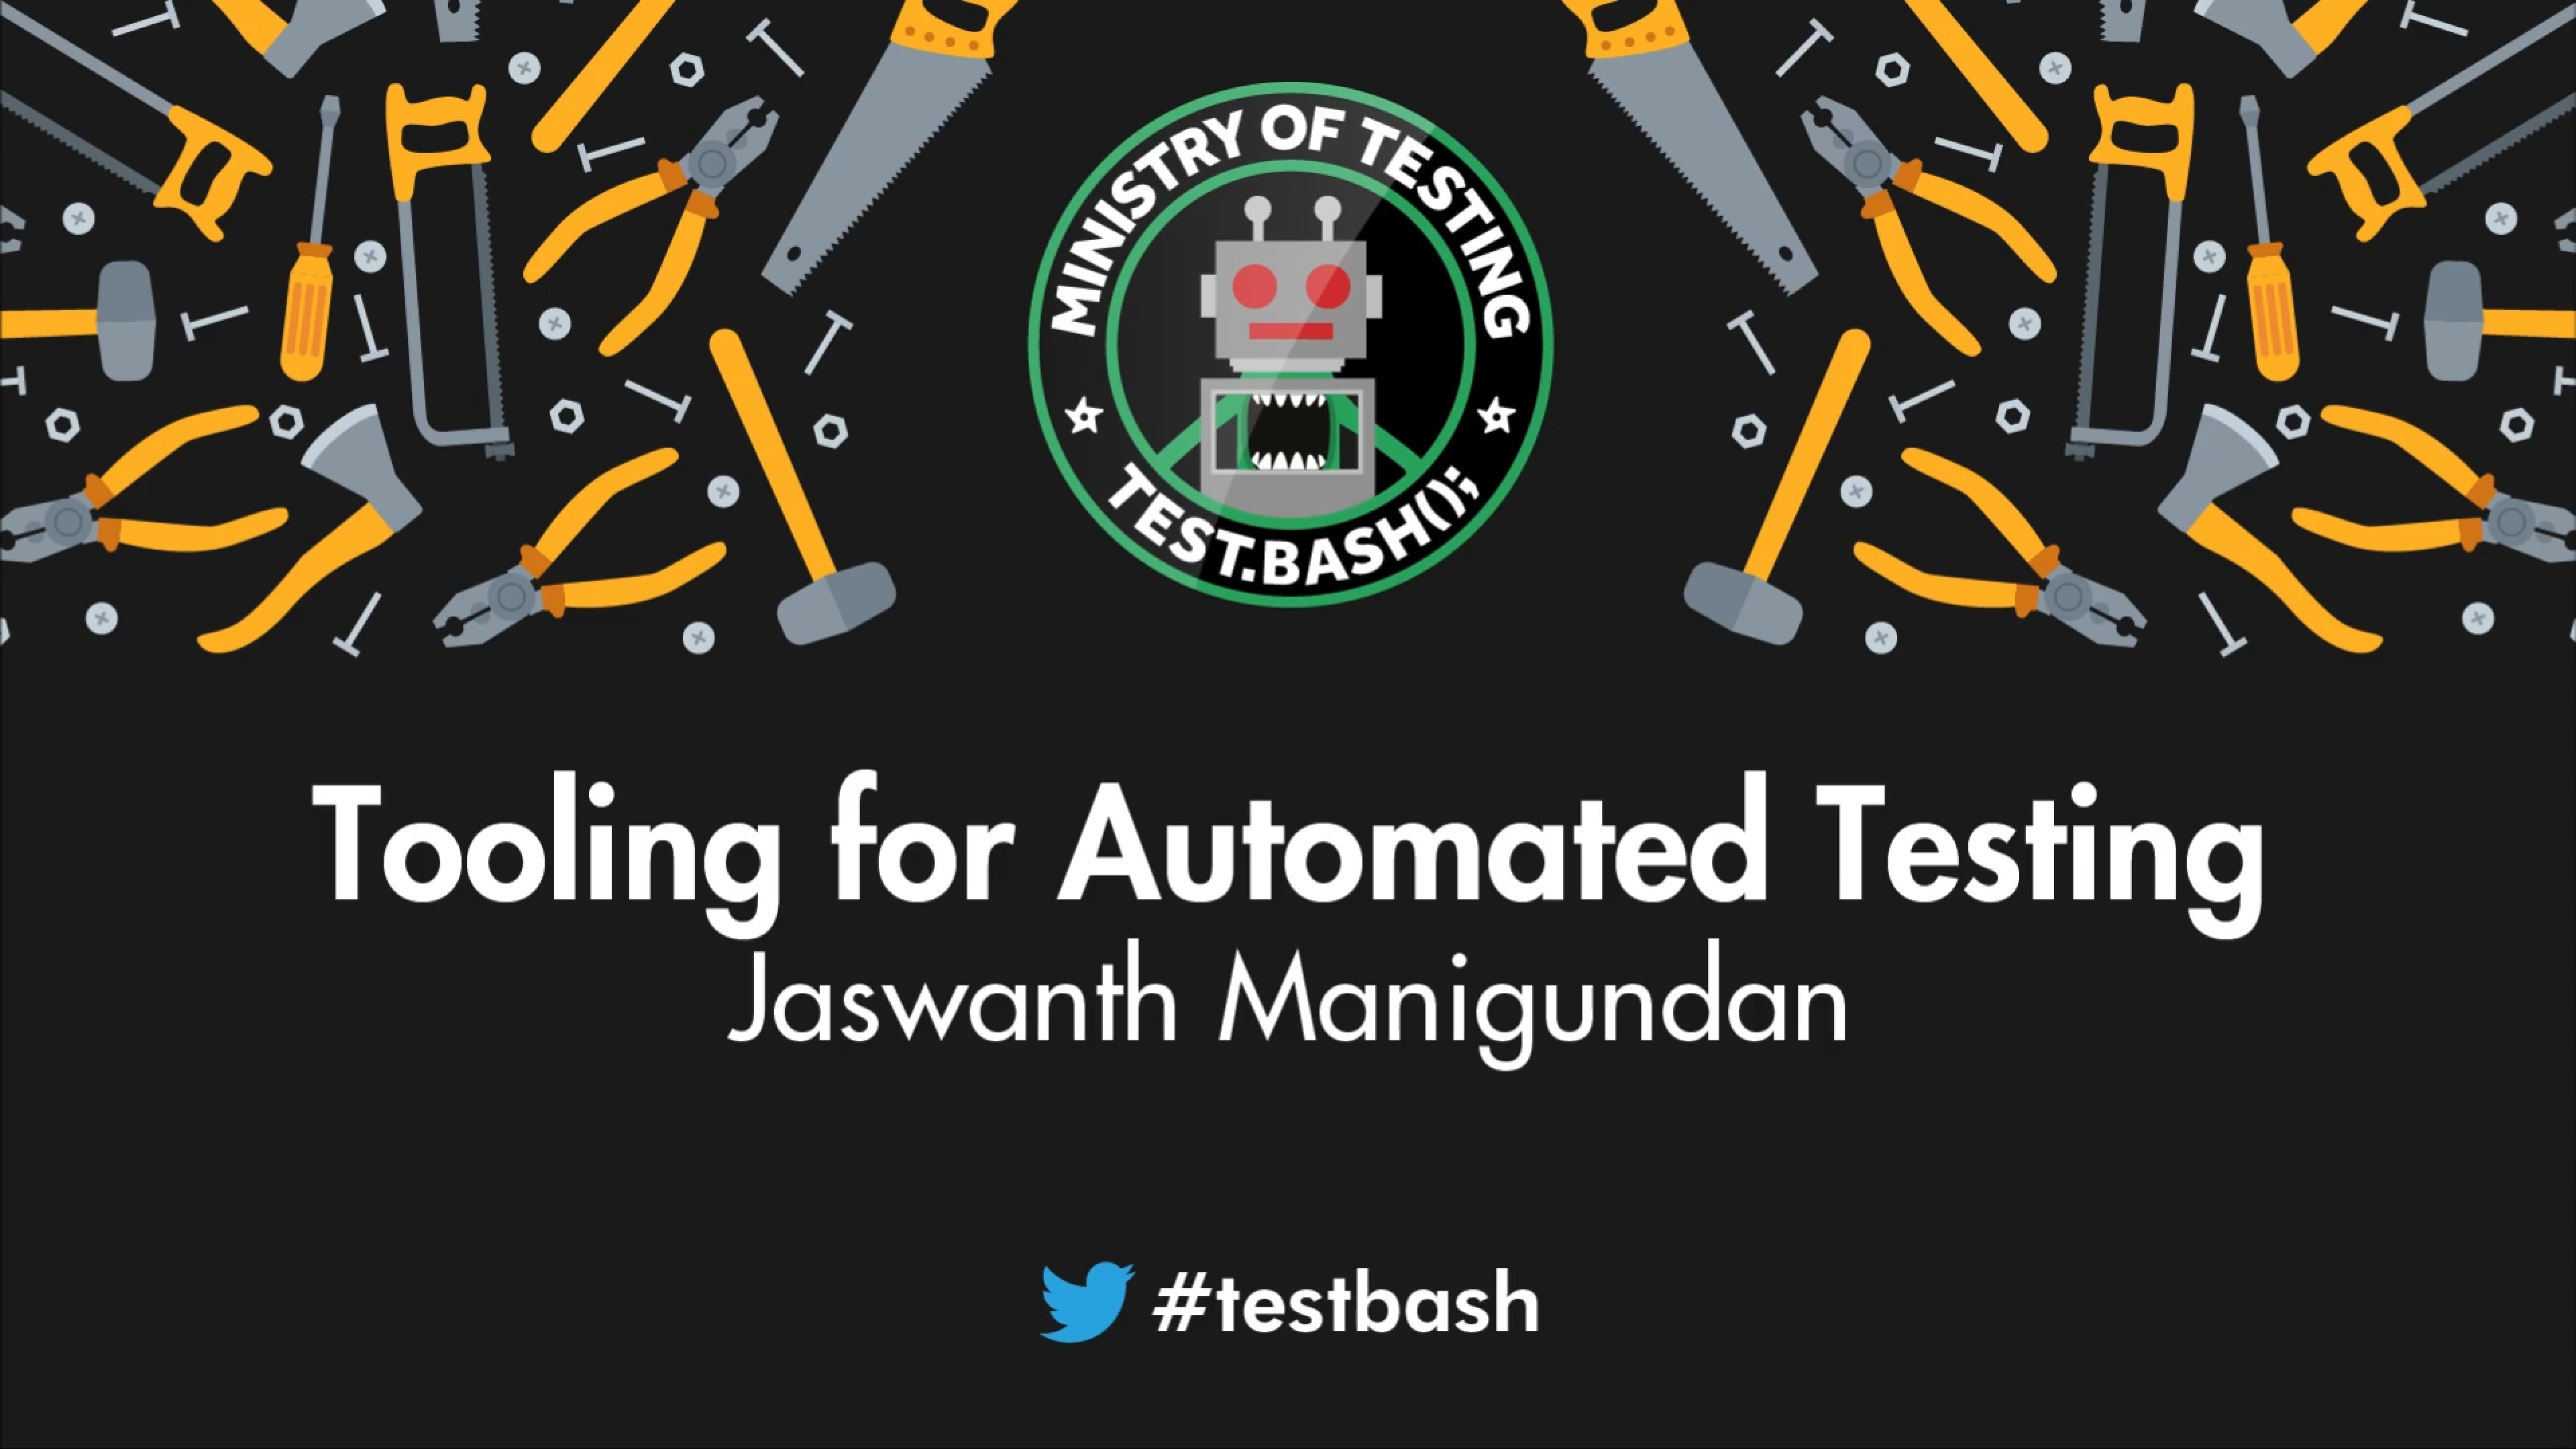 Tooling for Automated Testing with Jaswanth Manigundan